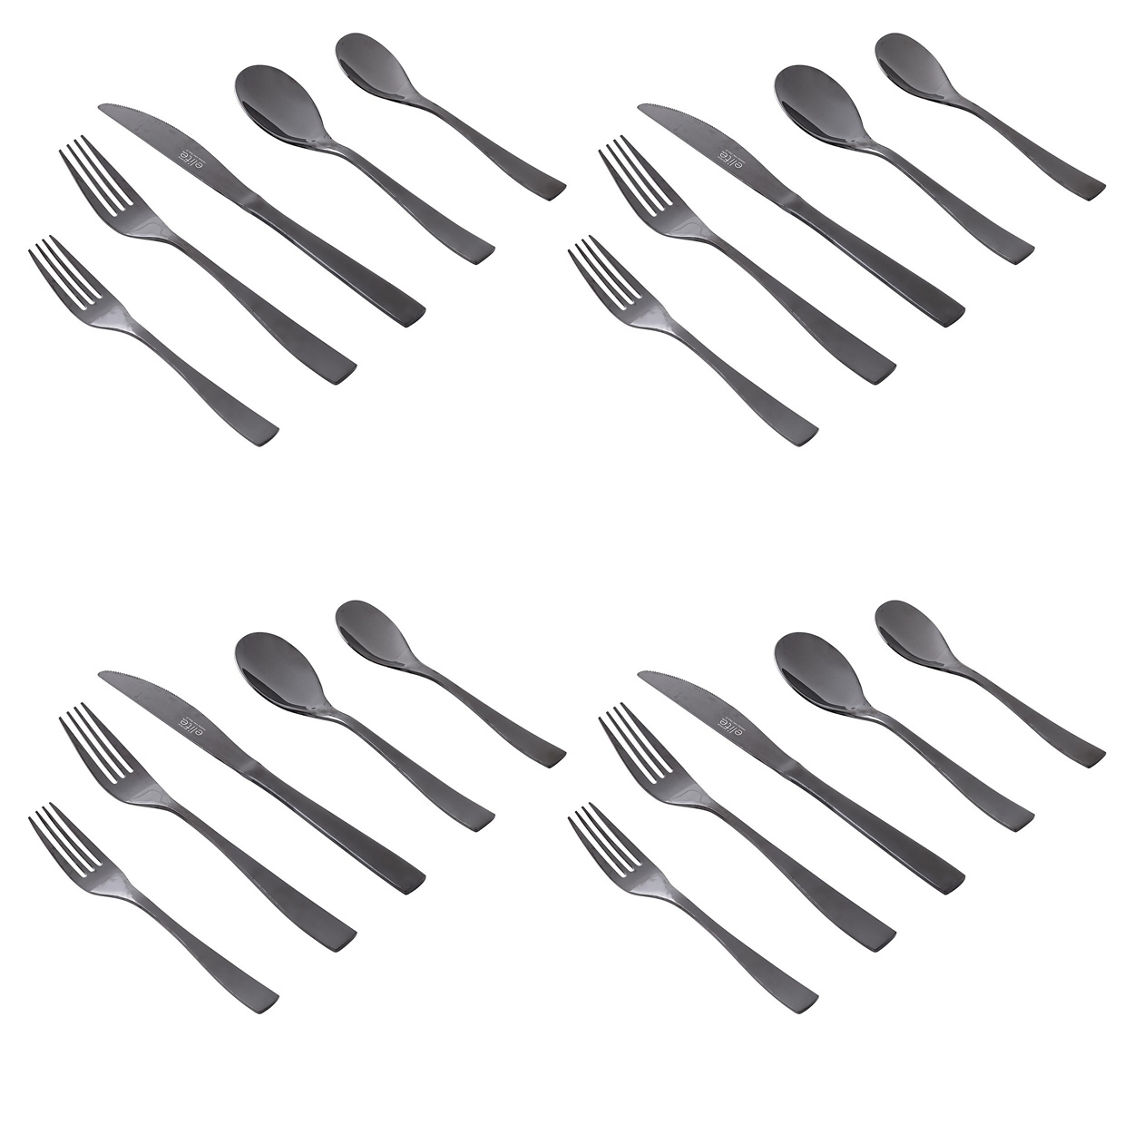 Gibson Home Holland Road 20 Piece Black Stainless Steel Flatware Set - Image 3 of 4